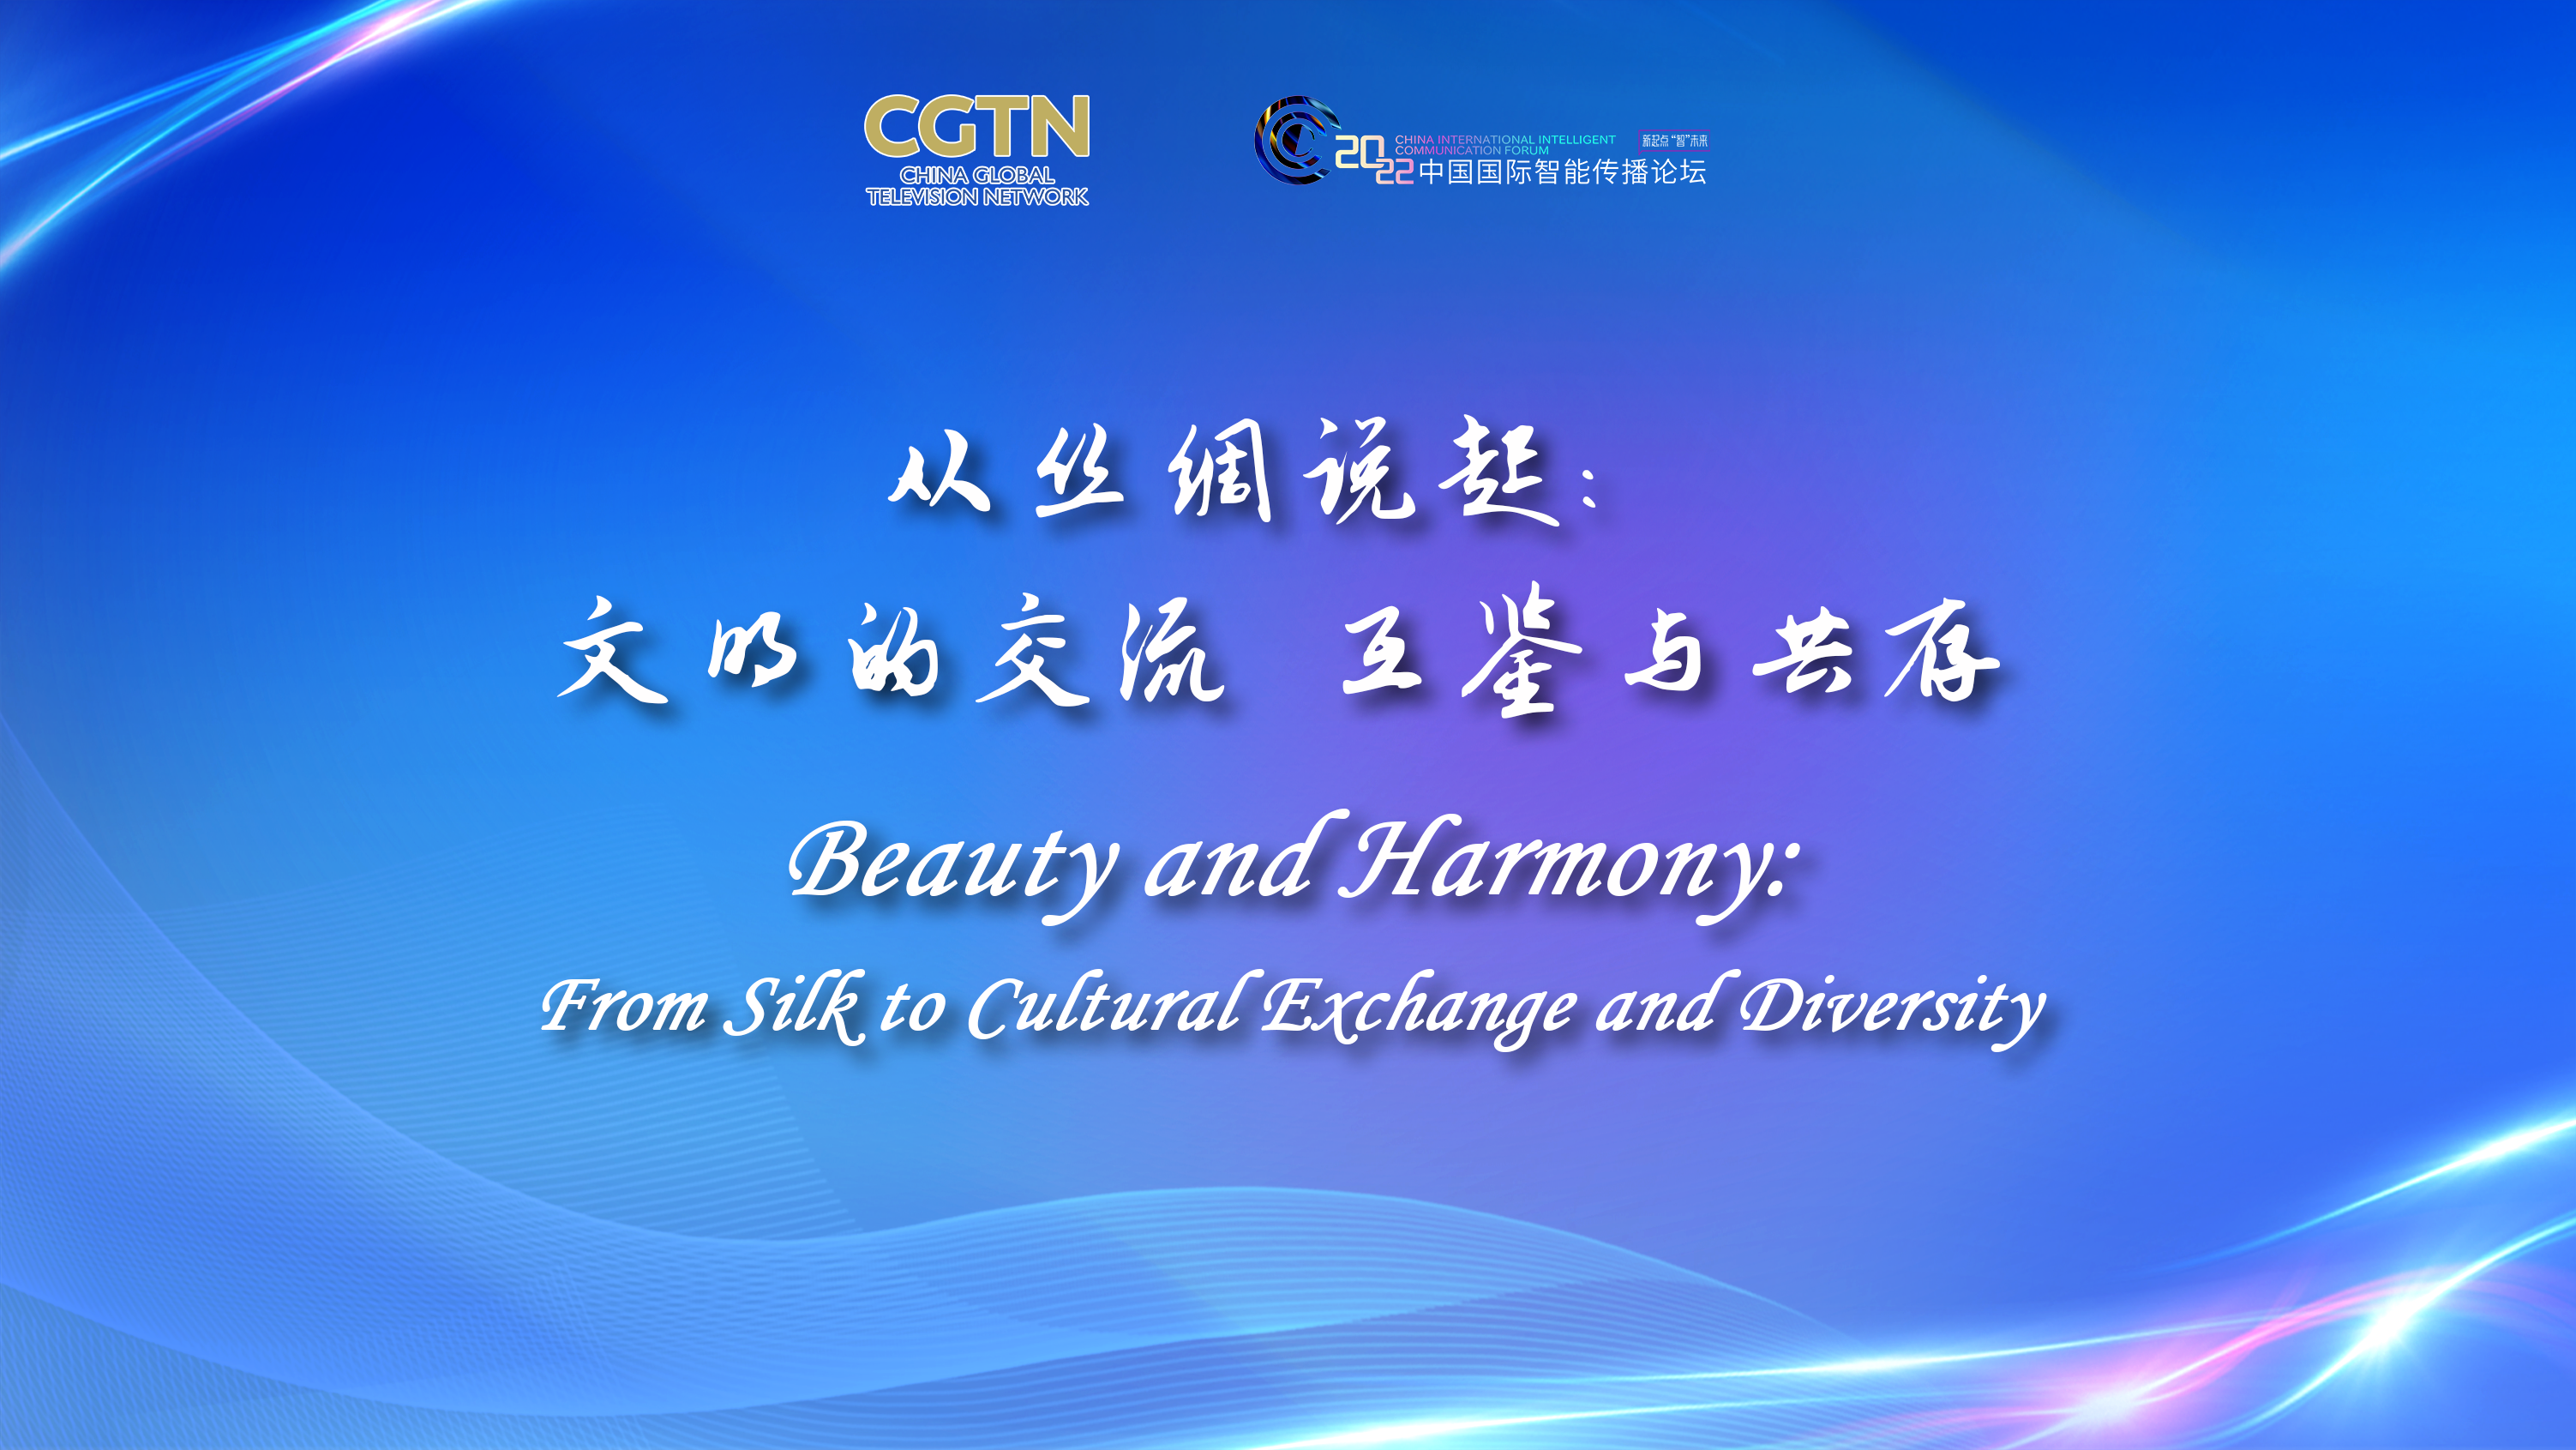 Live: Beauty and Harmony – from silk to cultural exchange and diversity